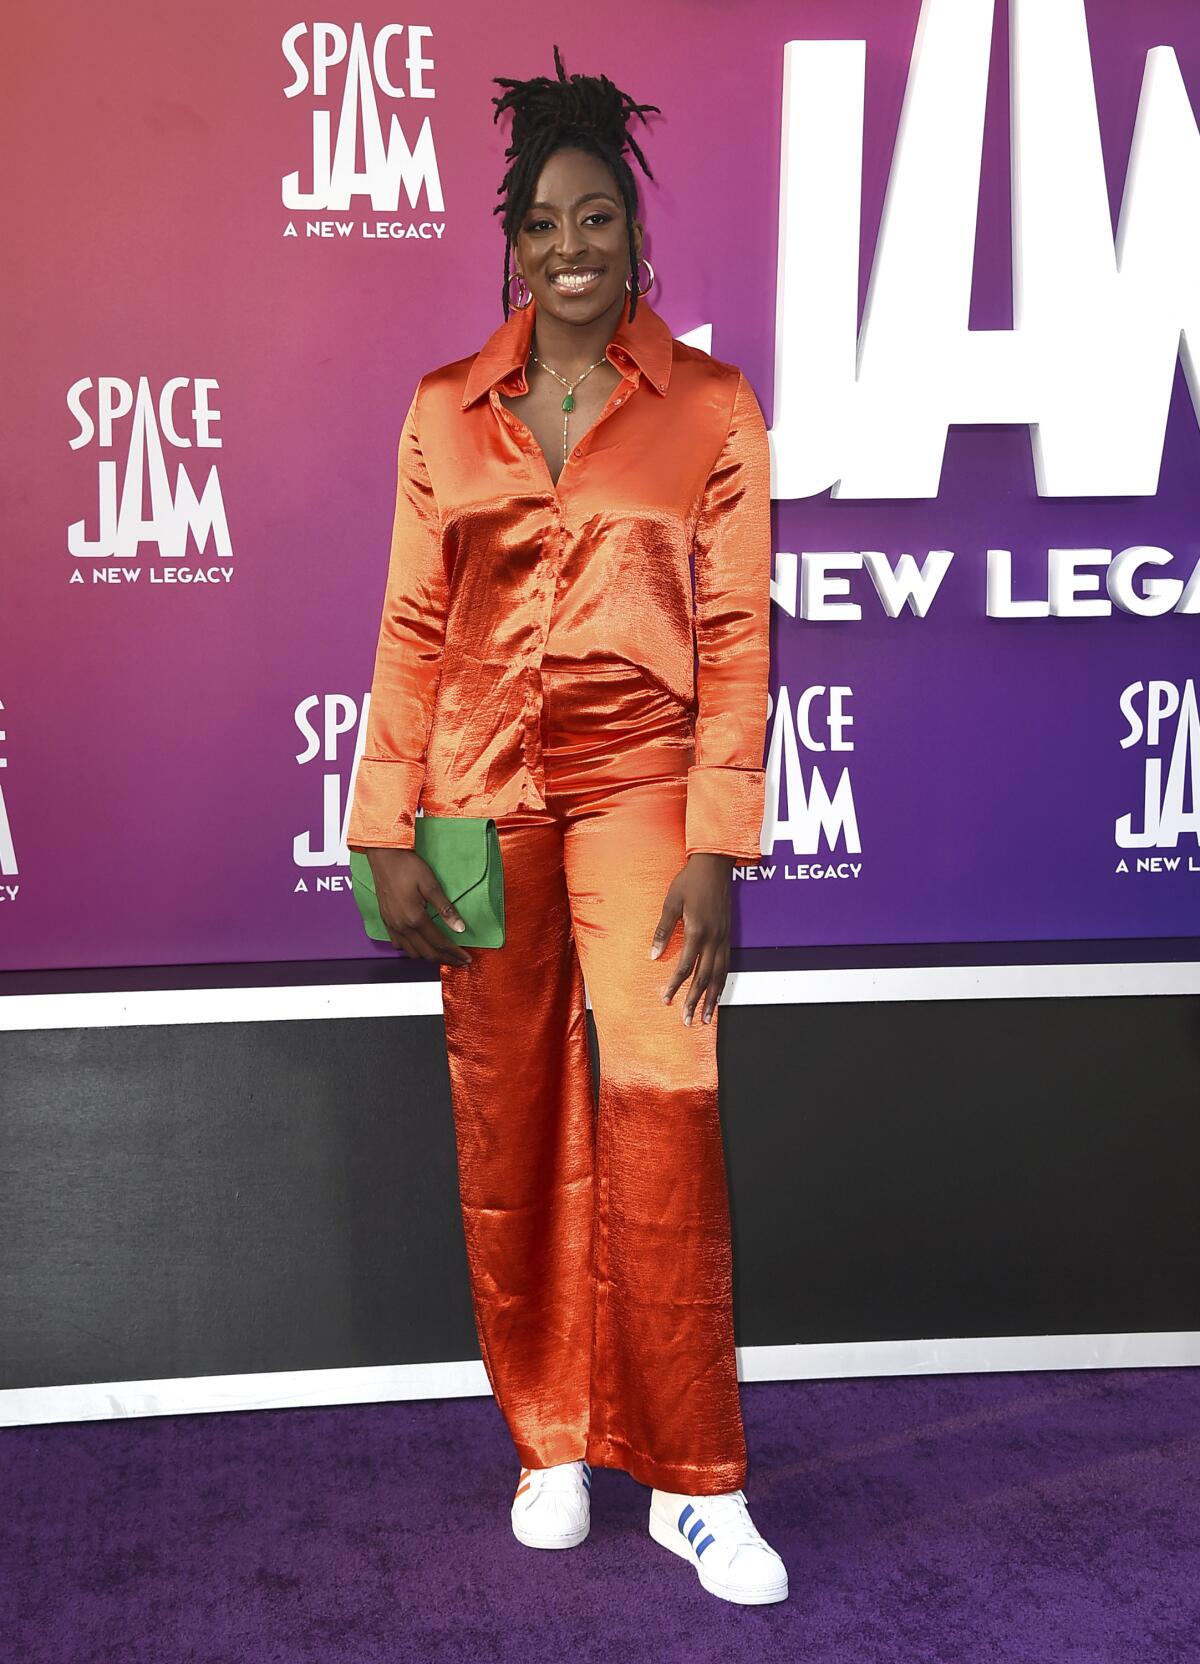 WNBA basketball player Nneka Ogwumike, of the Los Angeles Sparks, arrives at the world premiere of "Space Jam: A New Legacy" on Monday, July 12, 2021, at Regal L.A. Live in Los Angeles. (Photo by Jordan Strauss/Invision/AP)